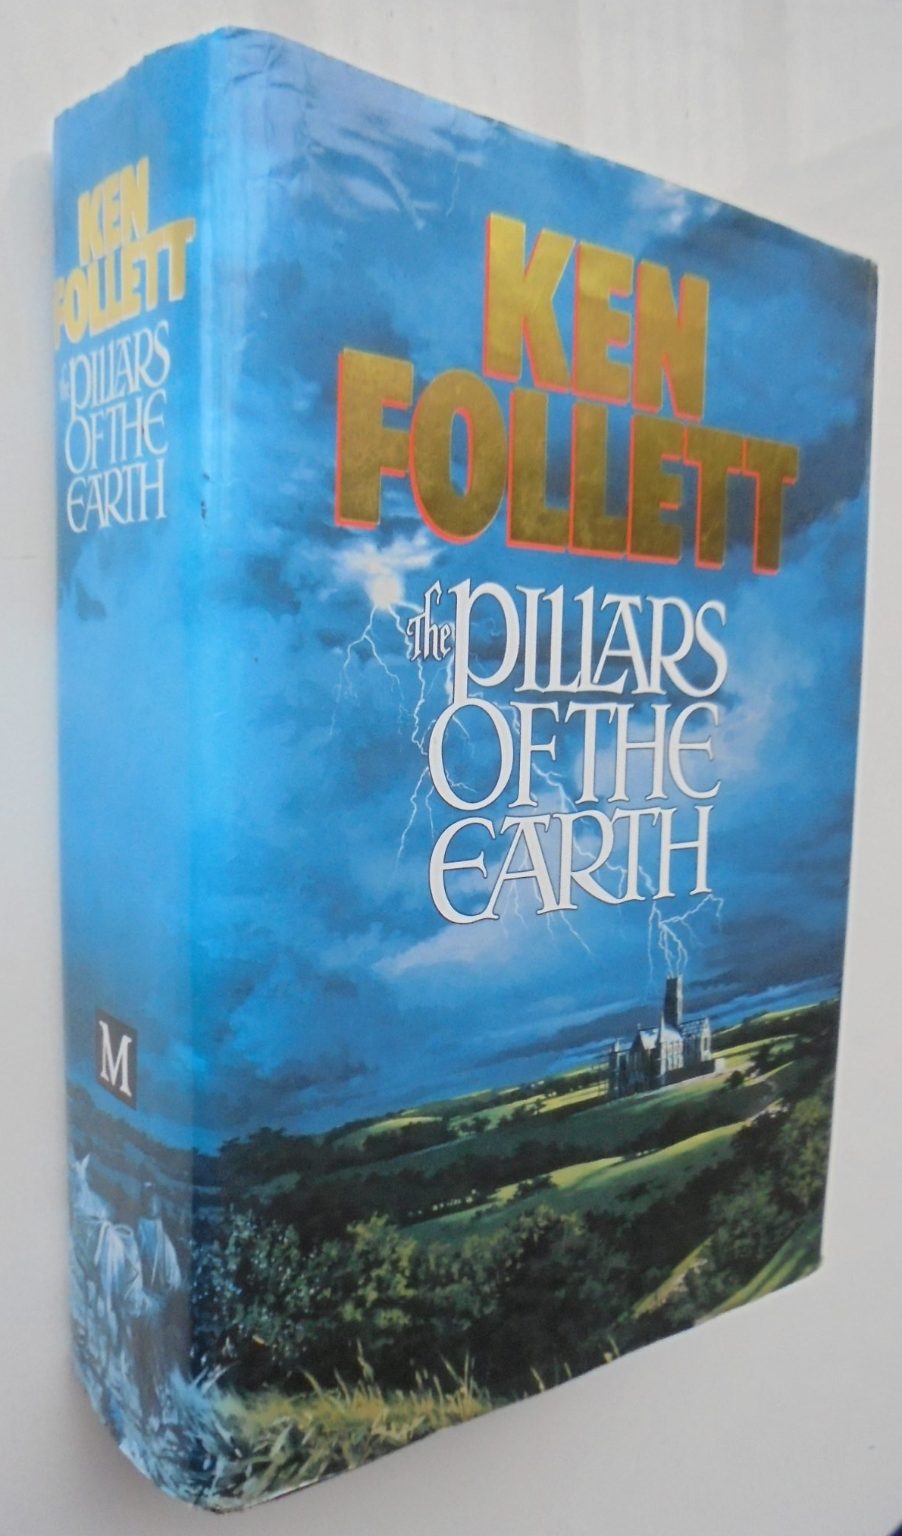 The Pillars of the Earth by Ken Follett. 1989, SCARCE. FIRST EDITION, 1st impression.